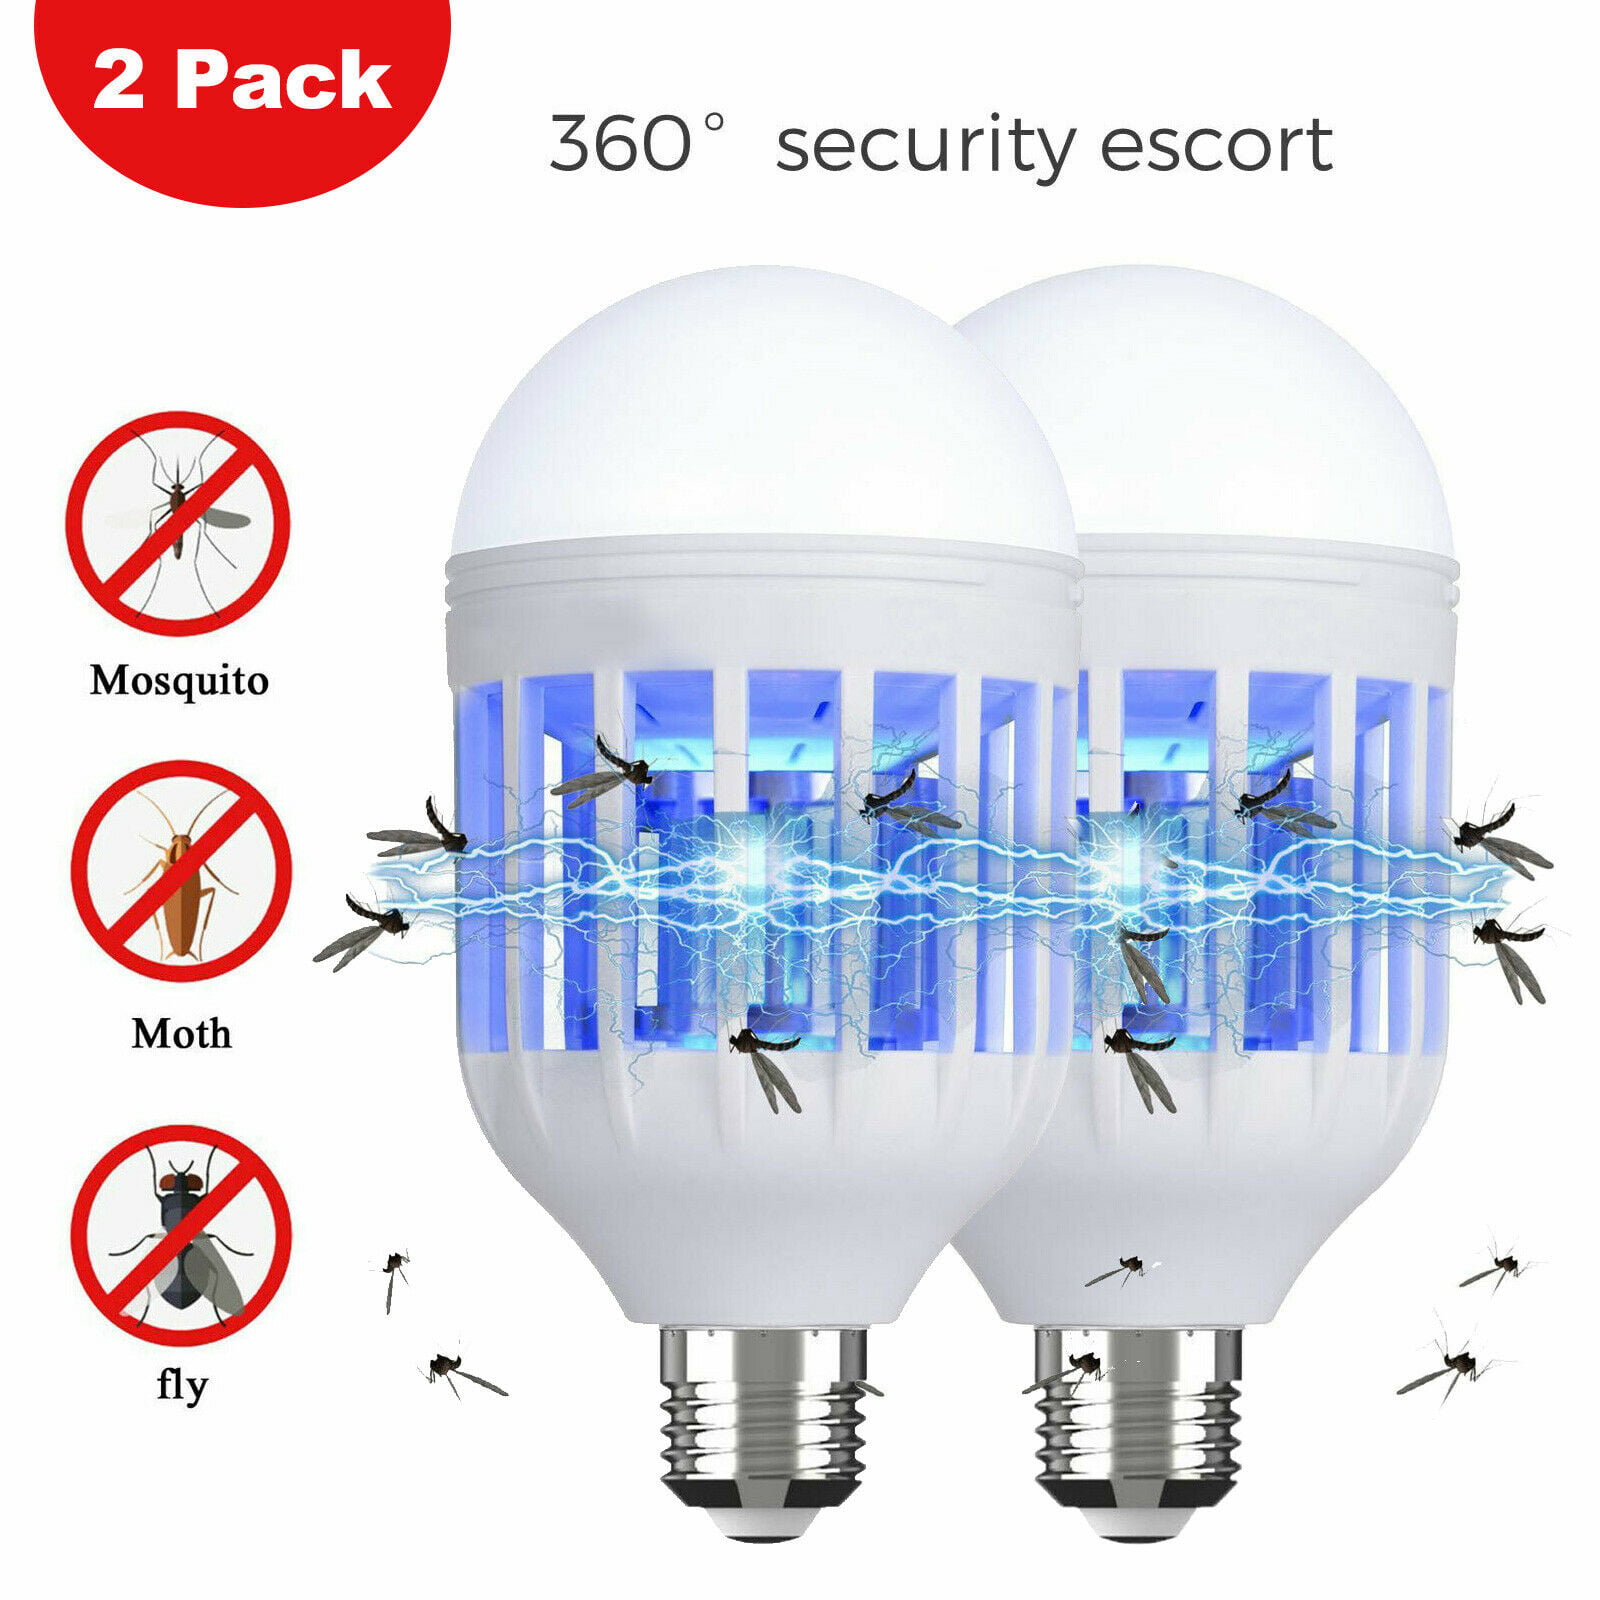 Details about   2Pack Electric UV Mosquito Killer Lamp Outdoor/Indoor Fly Bug Insect Zapper Trap 